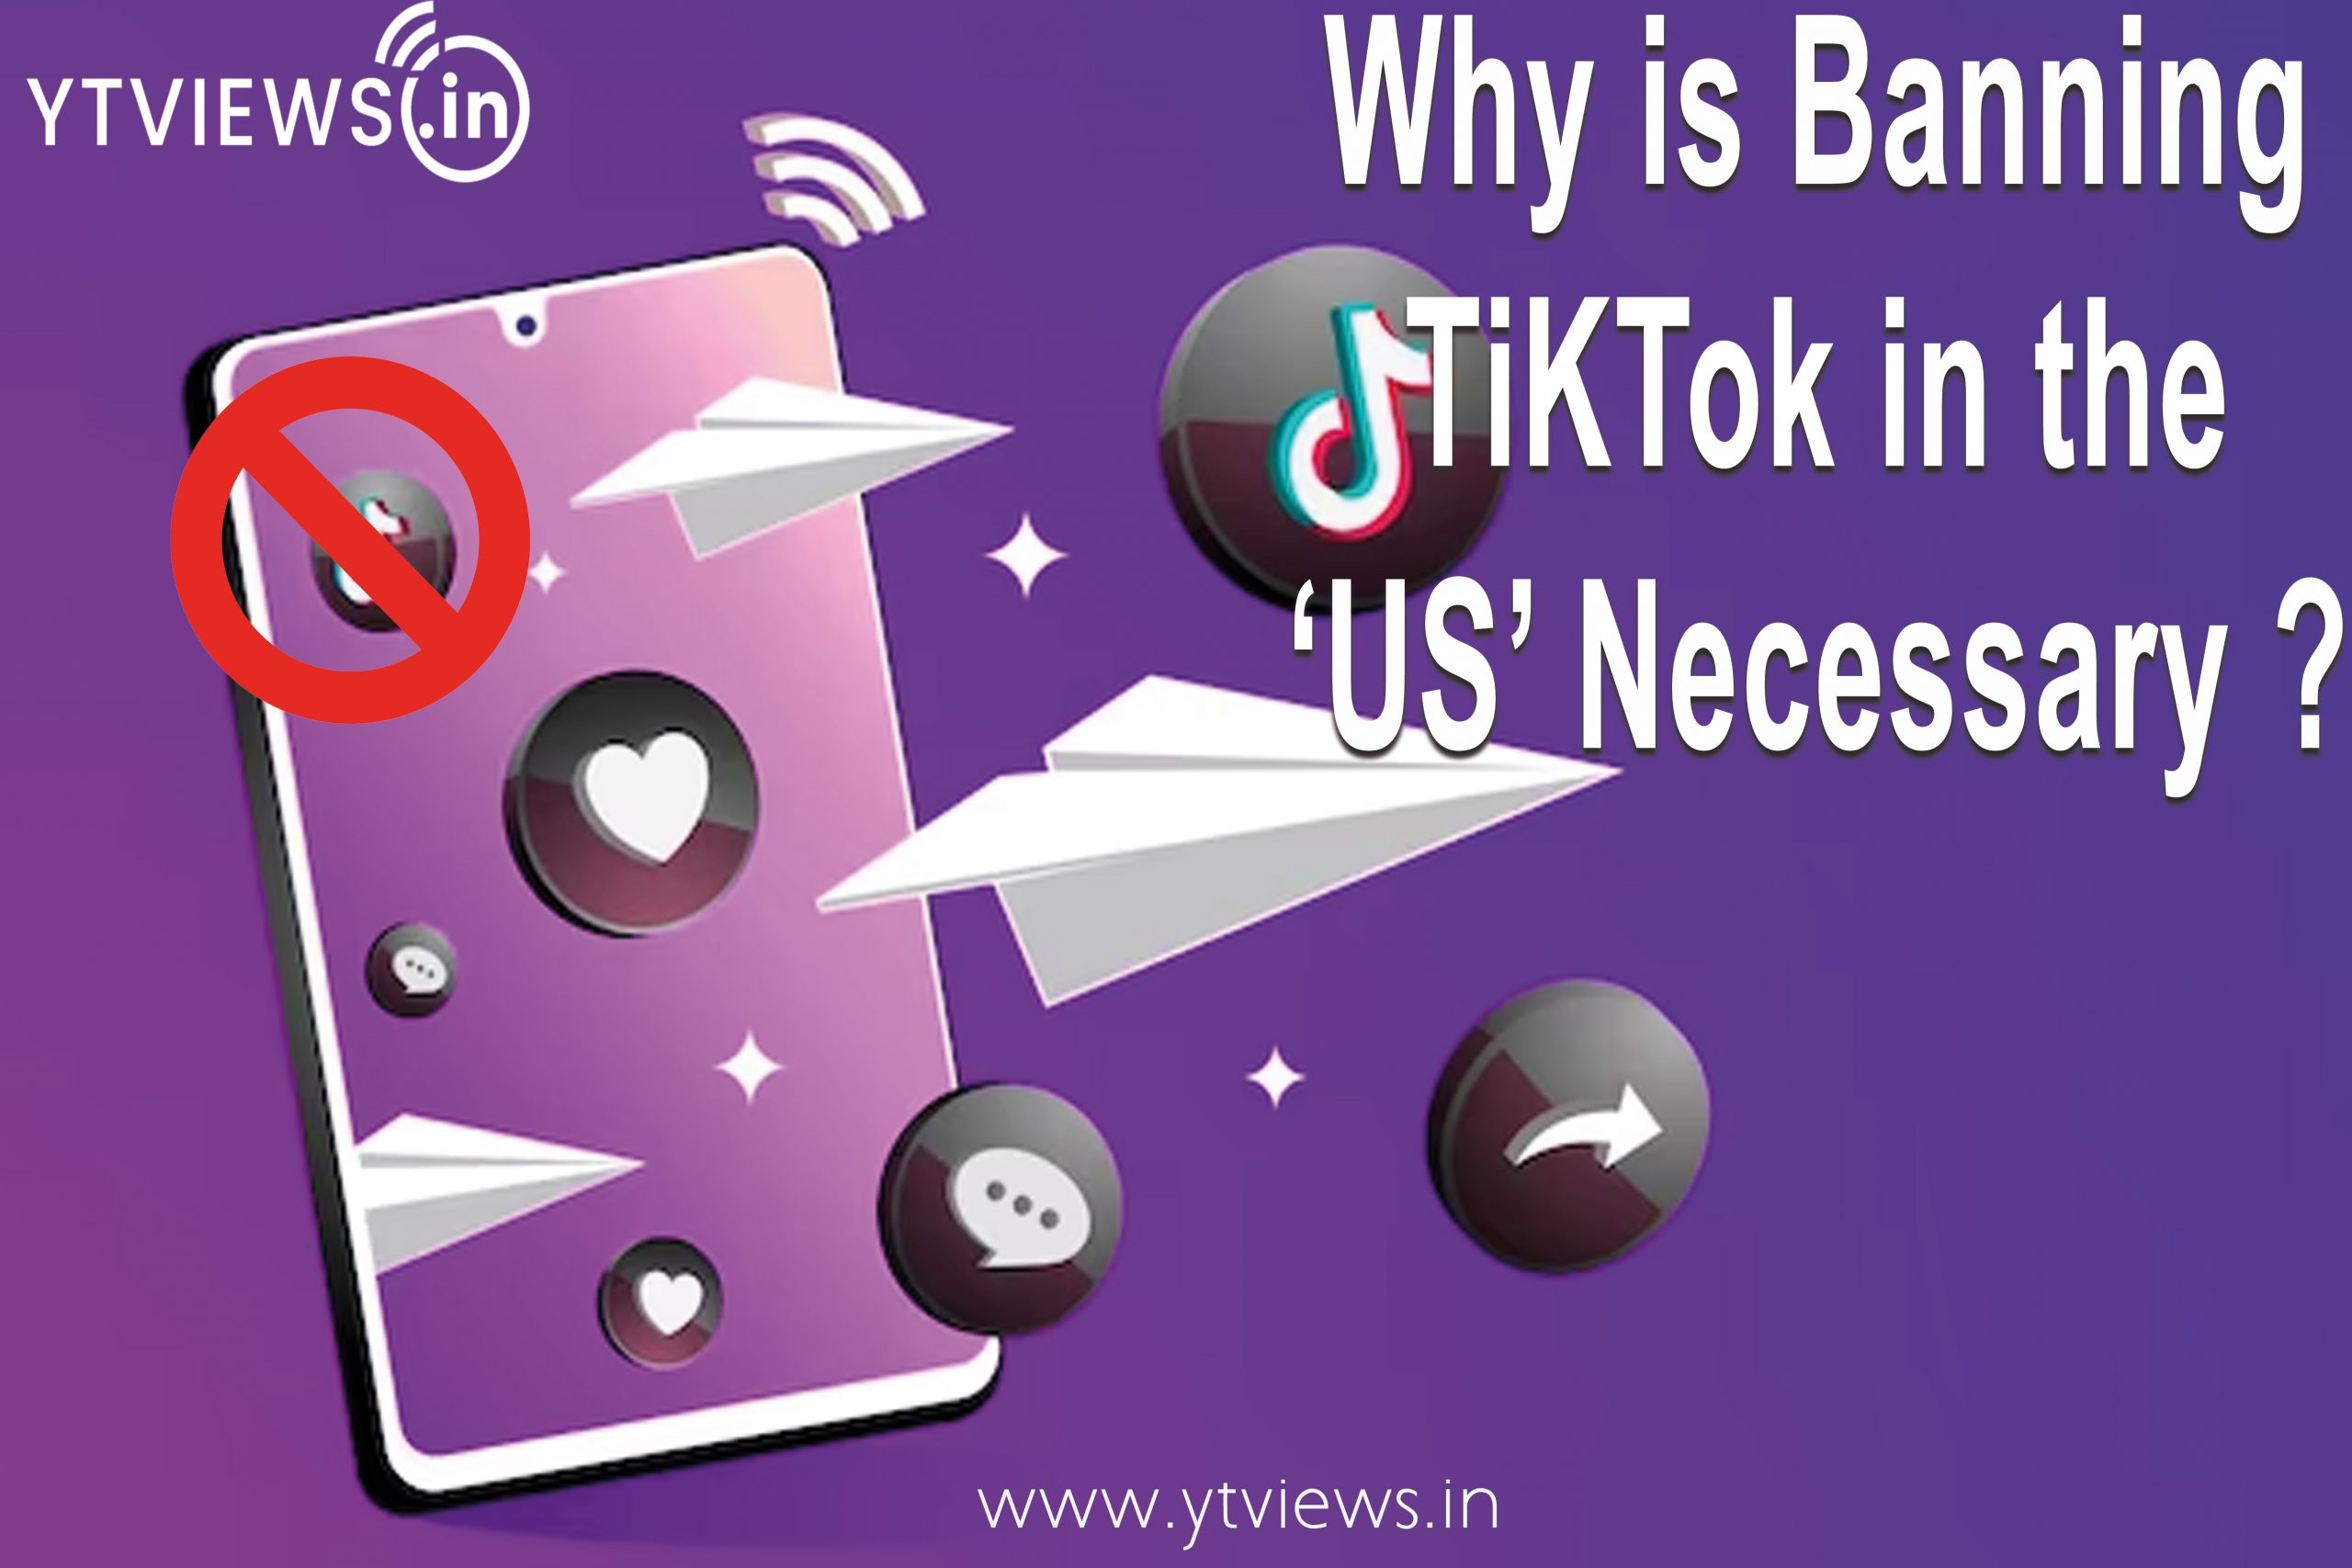 Why is banning TikTok in the US necessary?